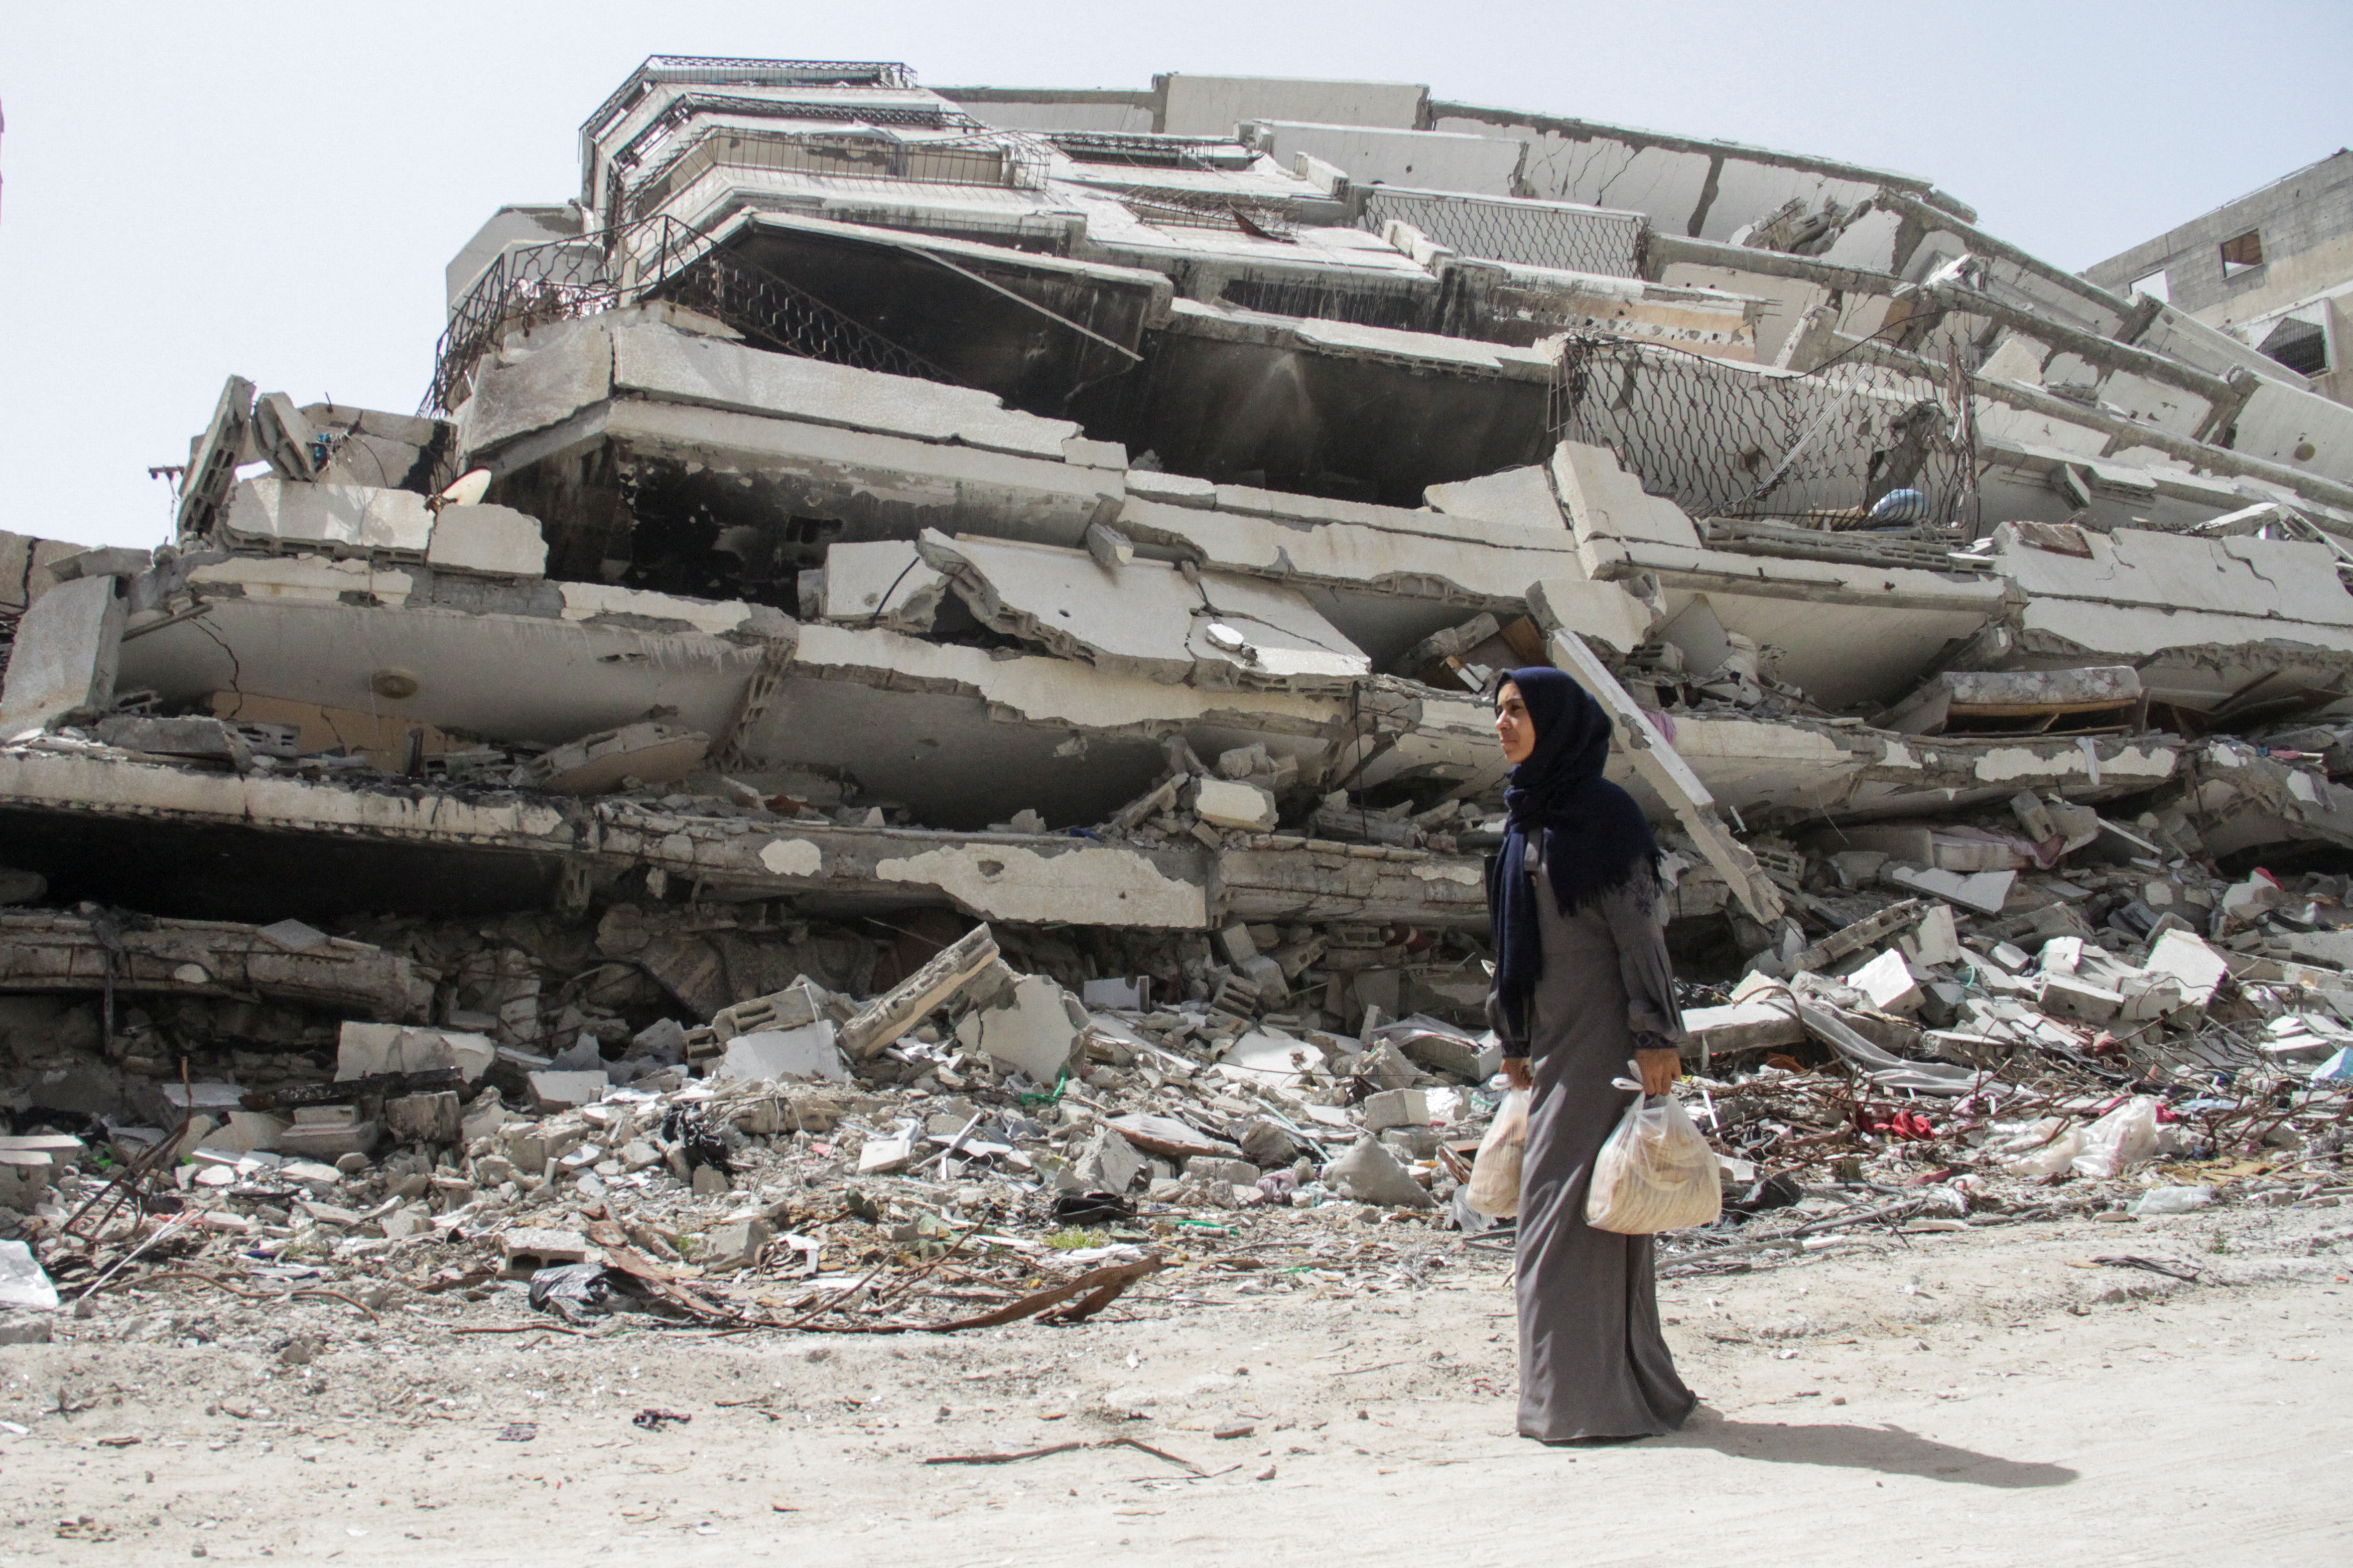 Palestinian woman Asmaa Al-Belbasi making her way back to her shelter after buying bread from a bakery, in Gaza City